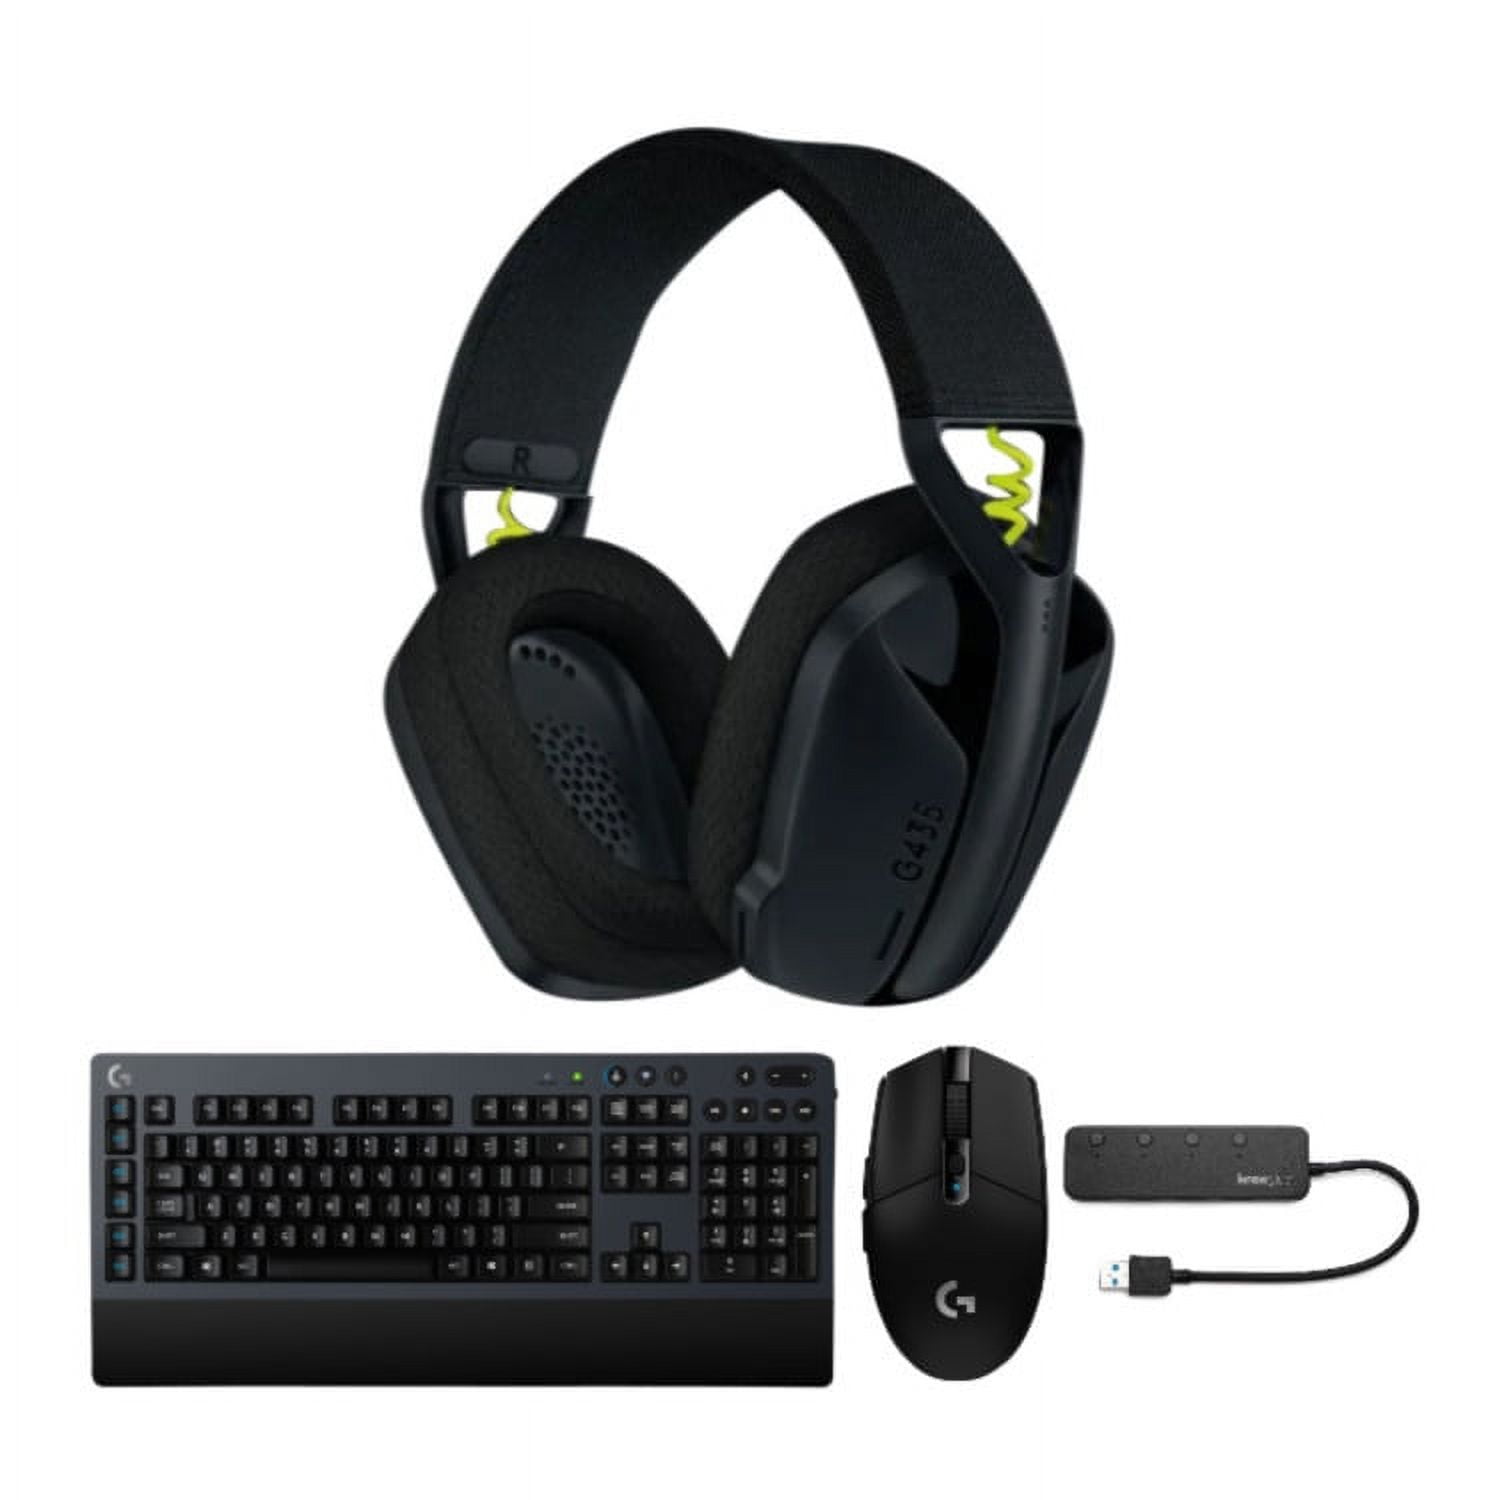 Logitech G Series G435 Wireless Gaming Headset with Keyboard, Mouse and USB  Hub 